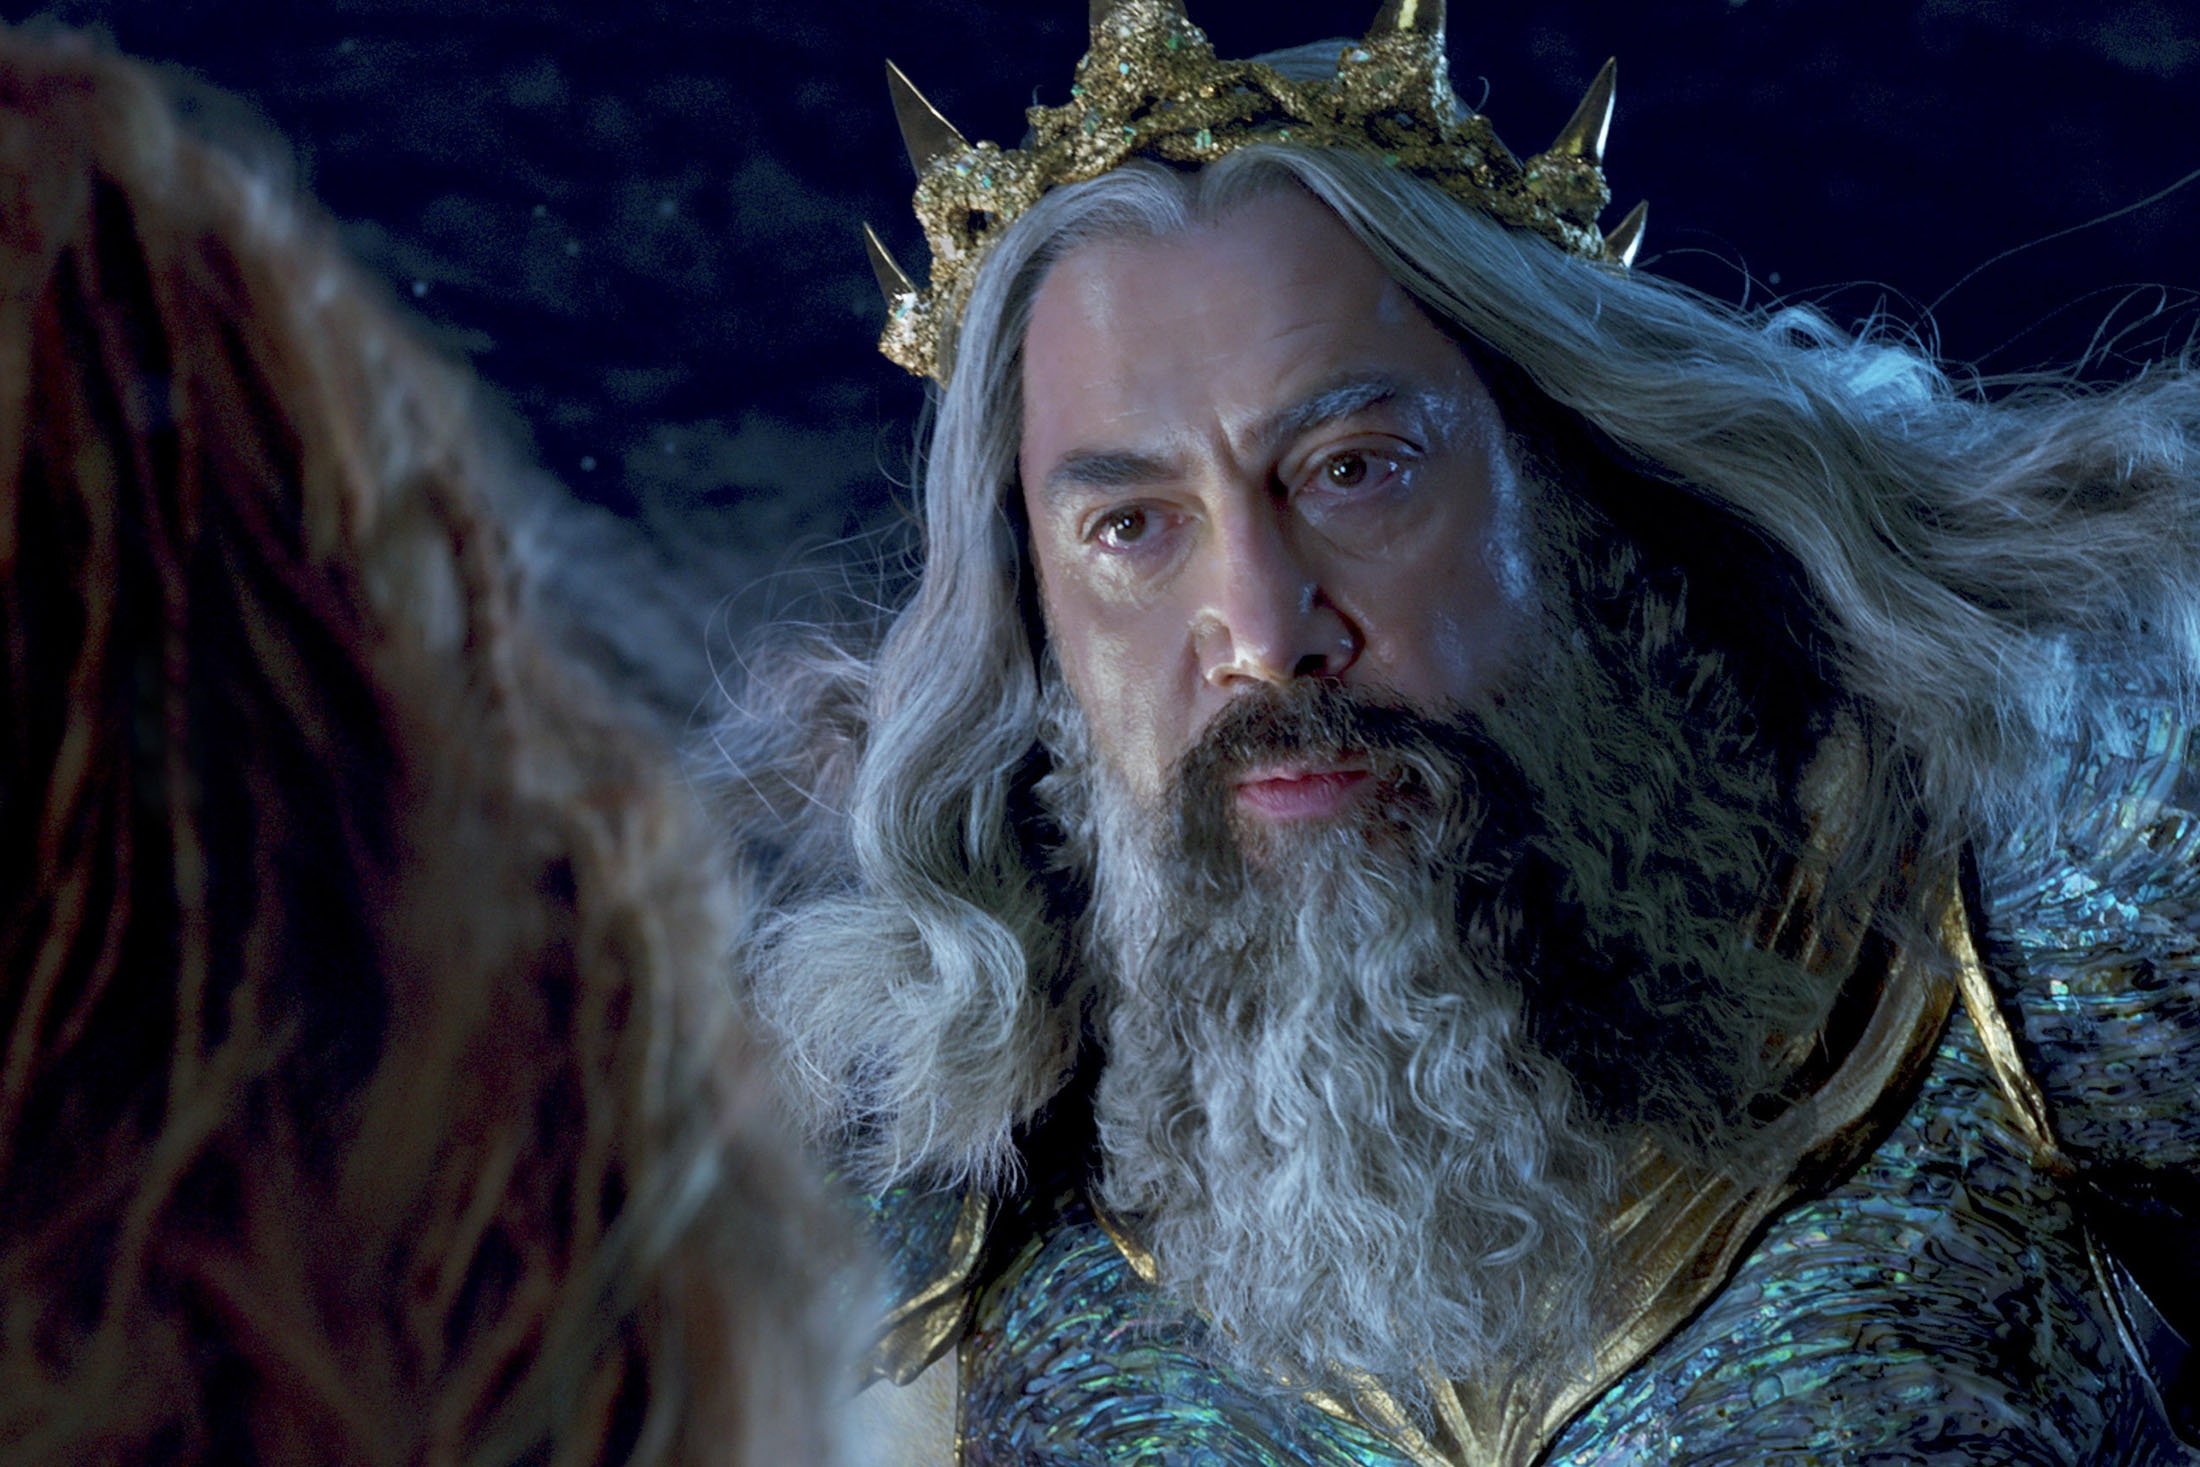 Halle Bailey (L) as Ariel, and Javier Bardem as King Triton, in a scene from the film 